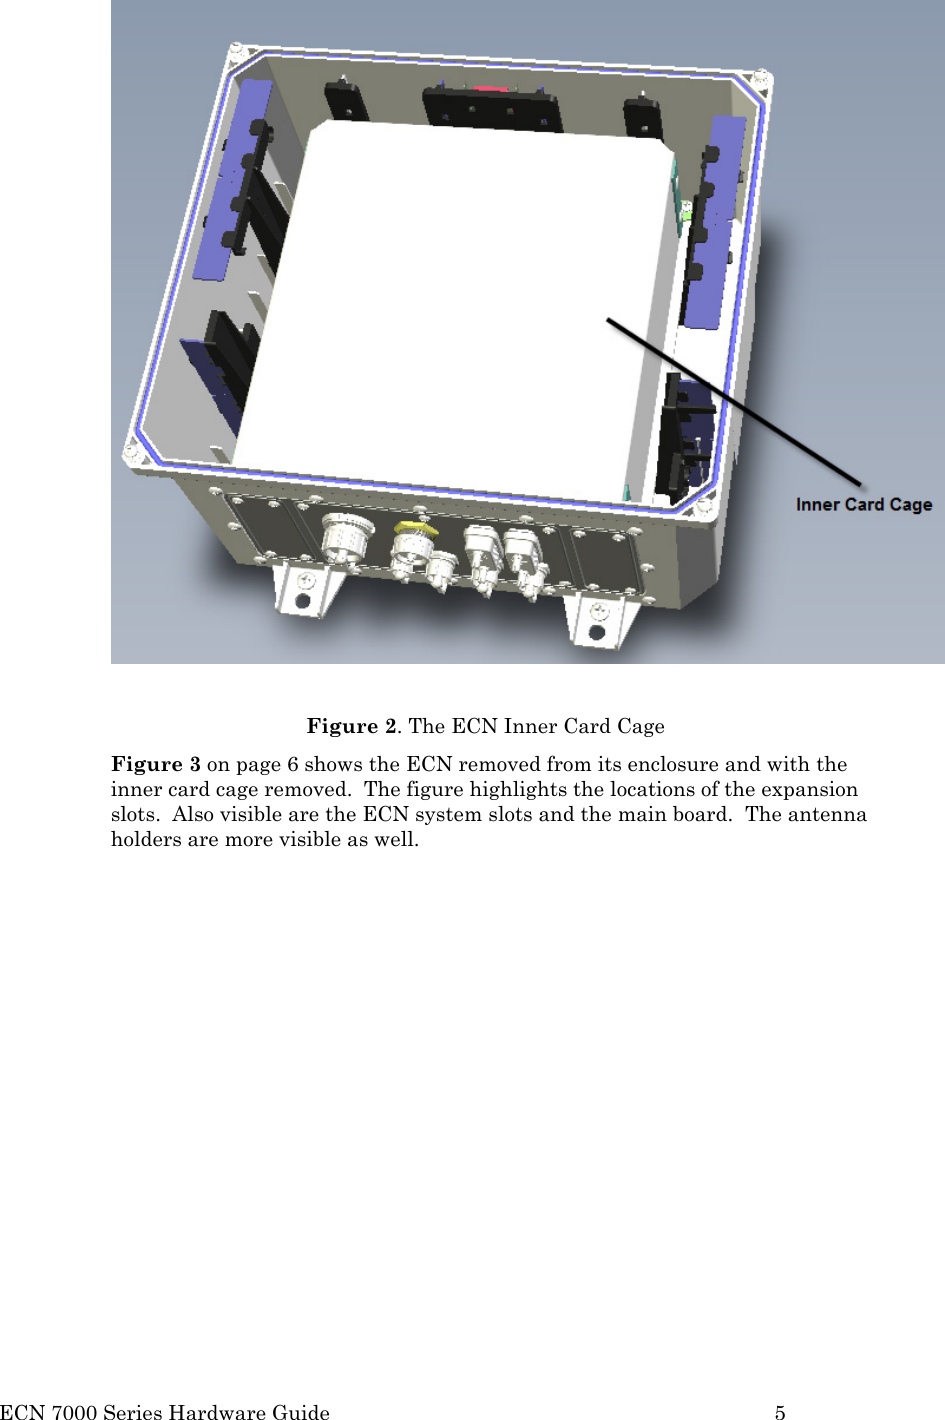  ECN 7000 Series Hardware Guide        5   Figure 2. The ECN Inner Card Cage Figure 3 on page 6 shows the ECN removed from its enclosure and with the inner card cage removed.  The figure highlights the locations of the expansion slots.  Also visible are the ECN system slots and the main board.  The antenna holders are more visible as well. 